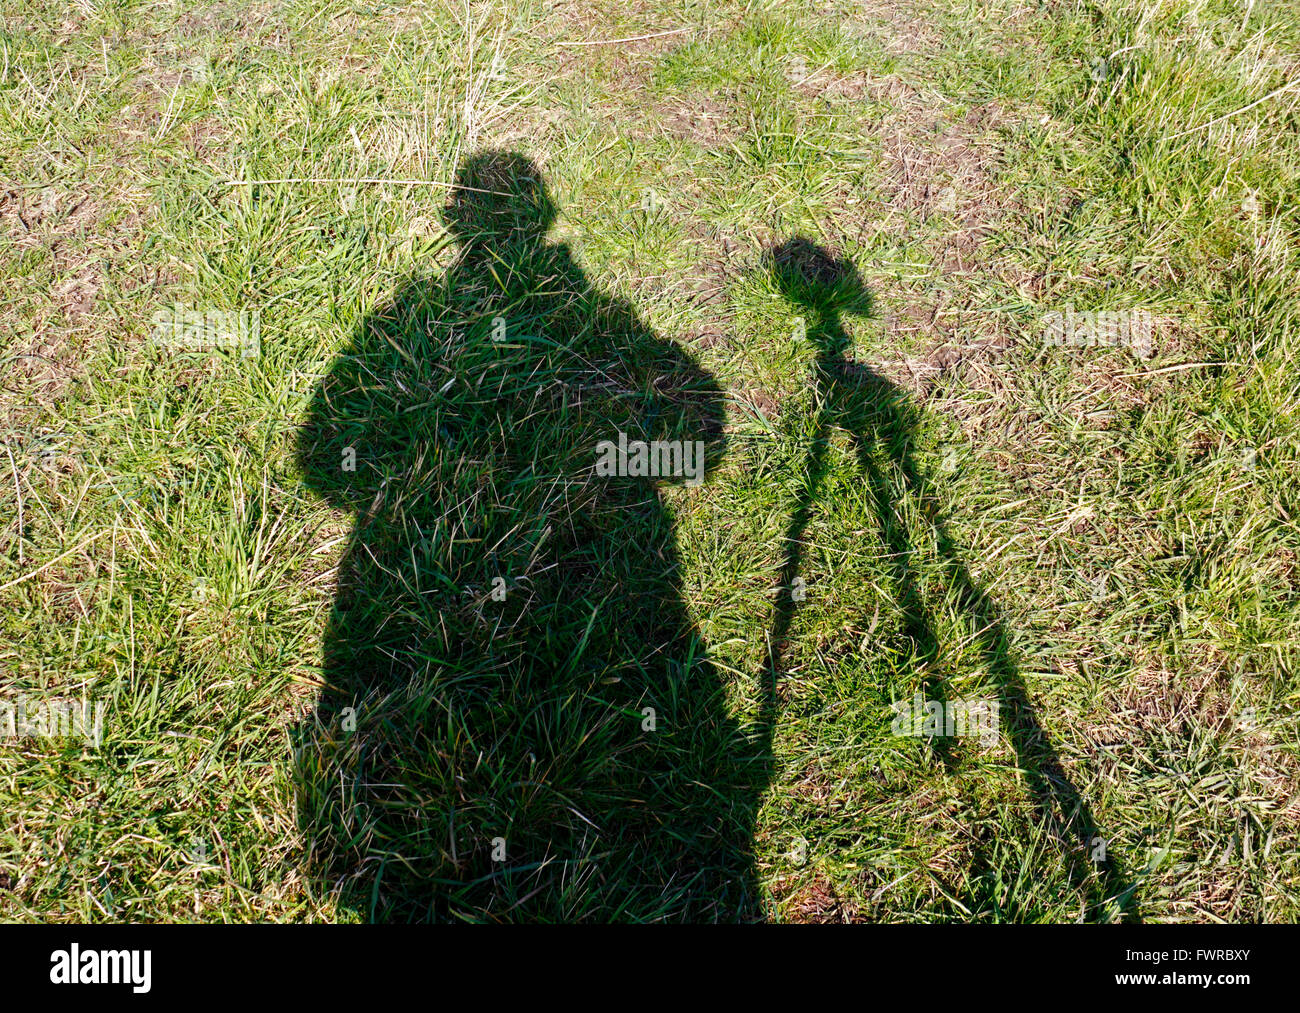 A creative view of a shadow of a photographer with camera on tripod. Stock Photo